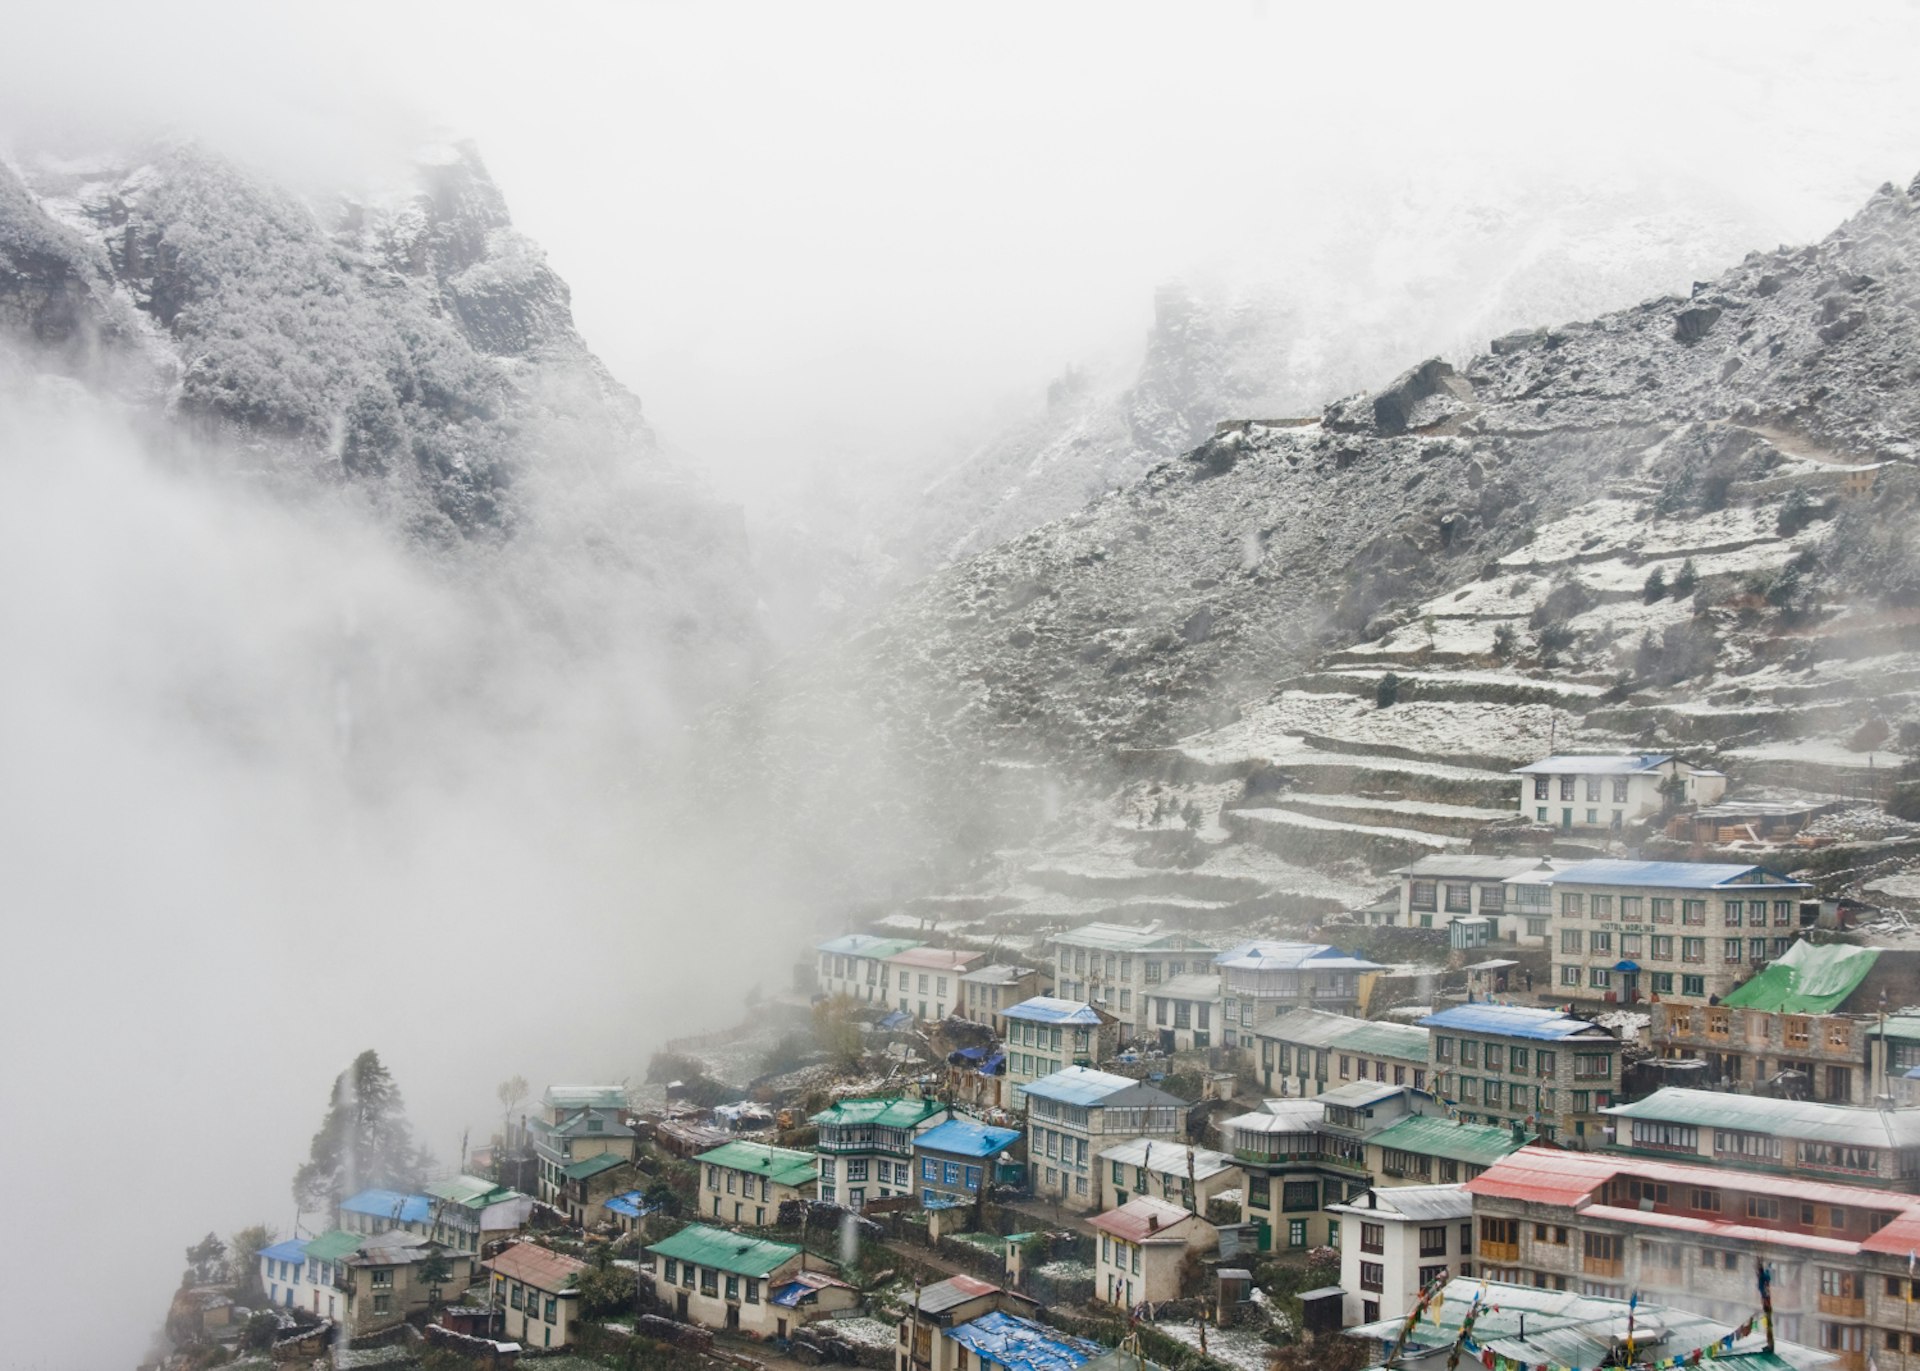 Snow arriving in Namche Bazaar. Image by Ethan Welty / Getty Images.